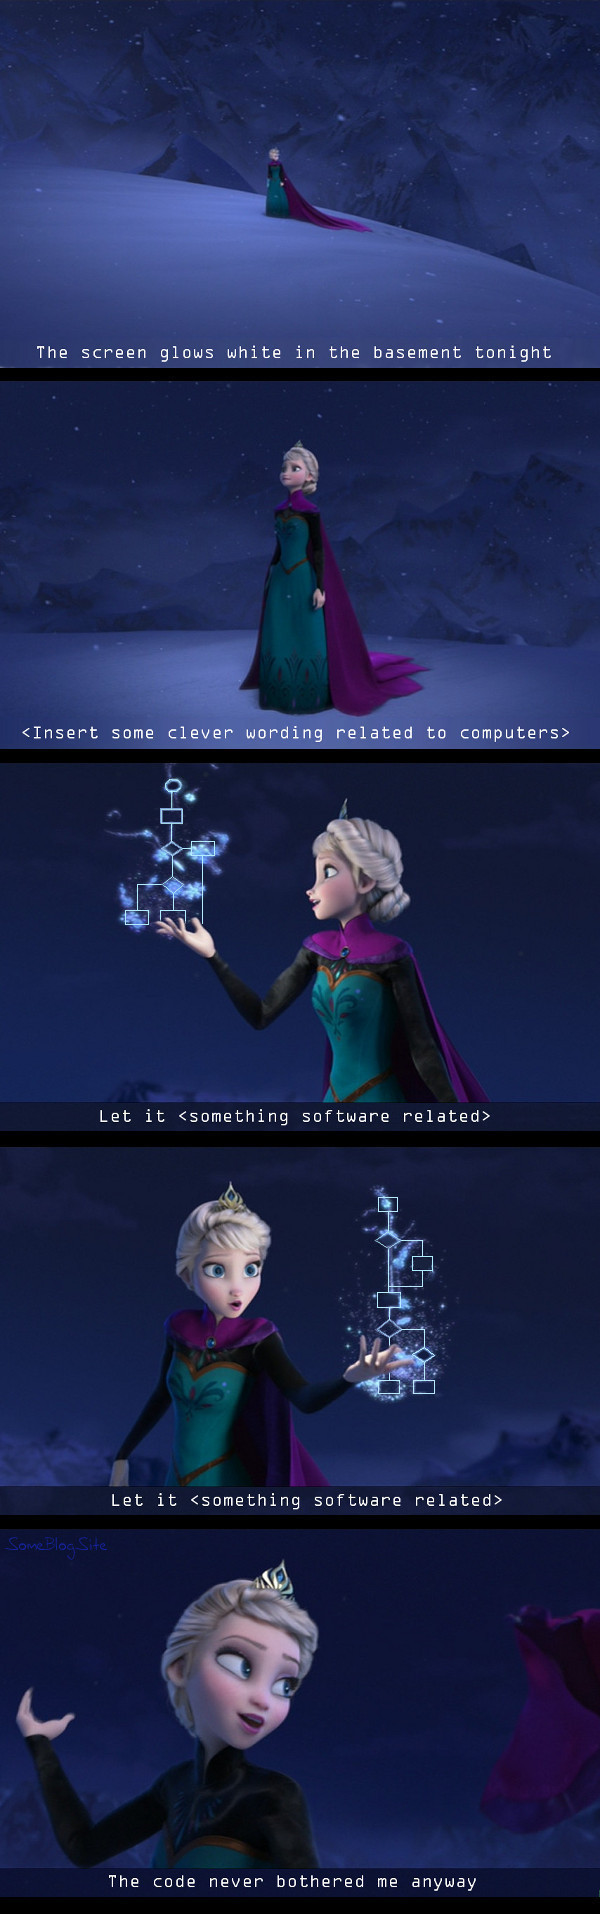 image of the coder's version of Let It Go, AKA Let It Goto